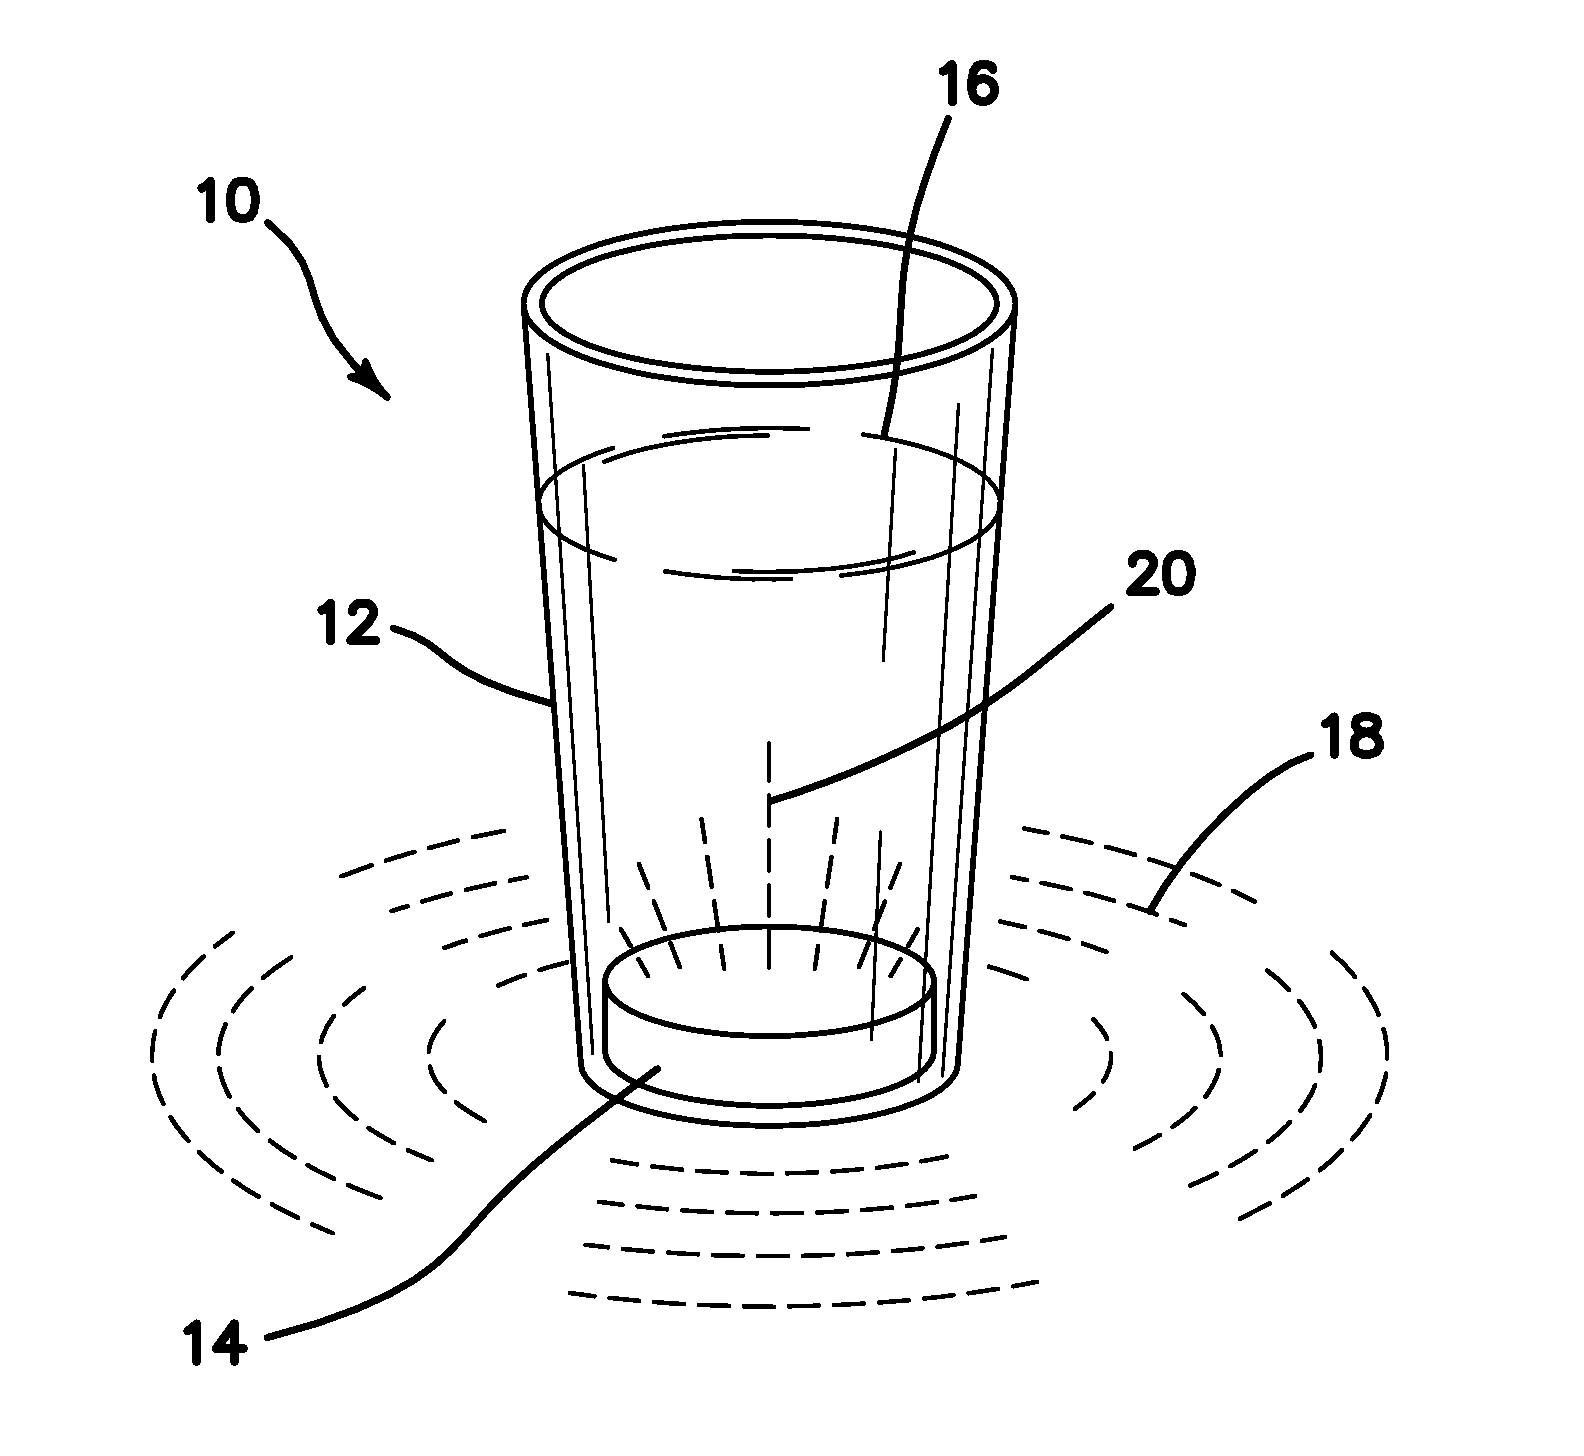 Beverage Container Illuminated and Controlled by Motion or Proximity Sensing Module Device